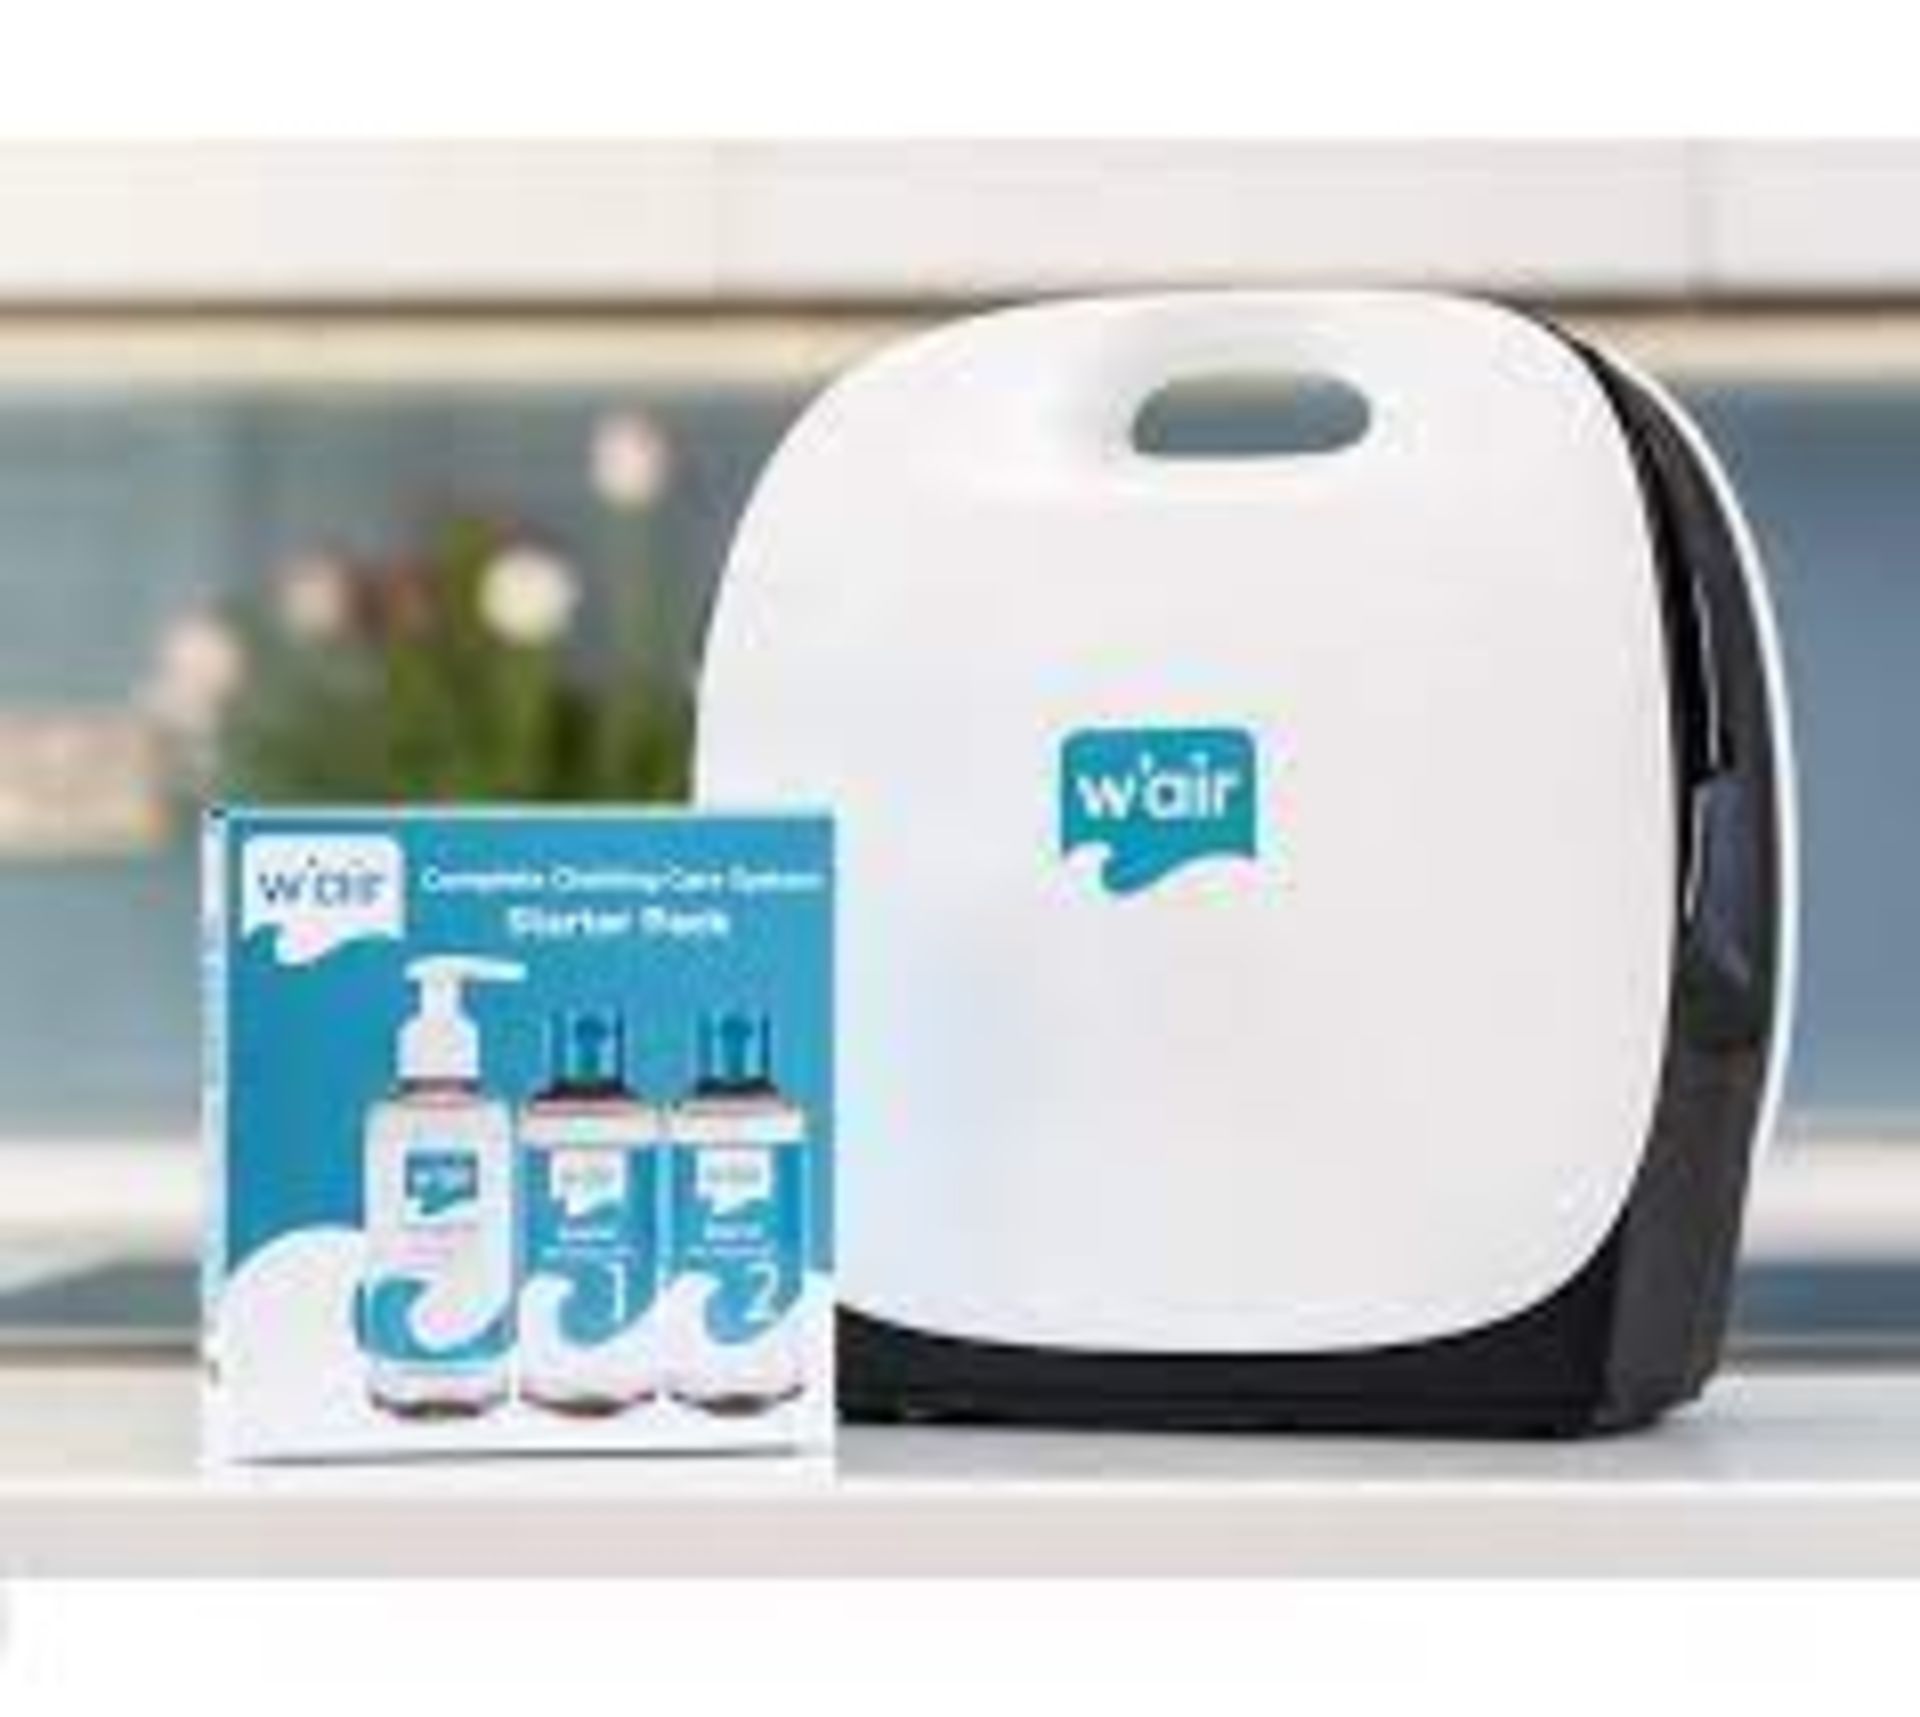 100 X BRAND NEW W'AIR SNEAKER CLEANING SYSTEMS RRP £299, The w'air uses hydrodynamic technology - Bild 5 aus 6